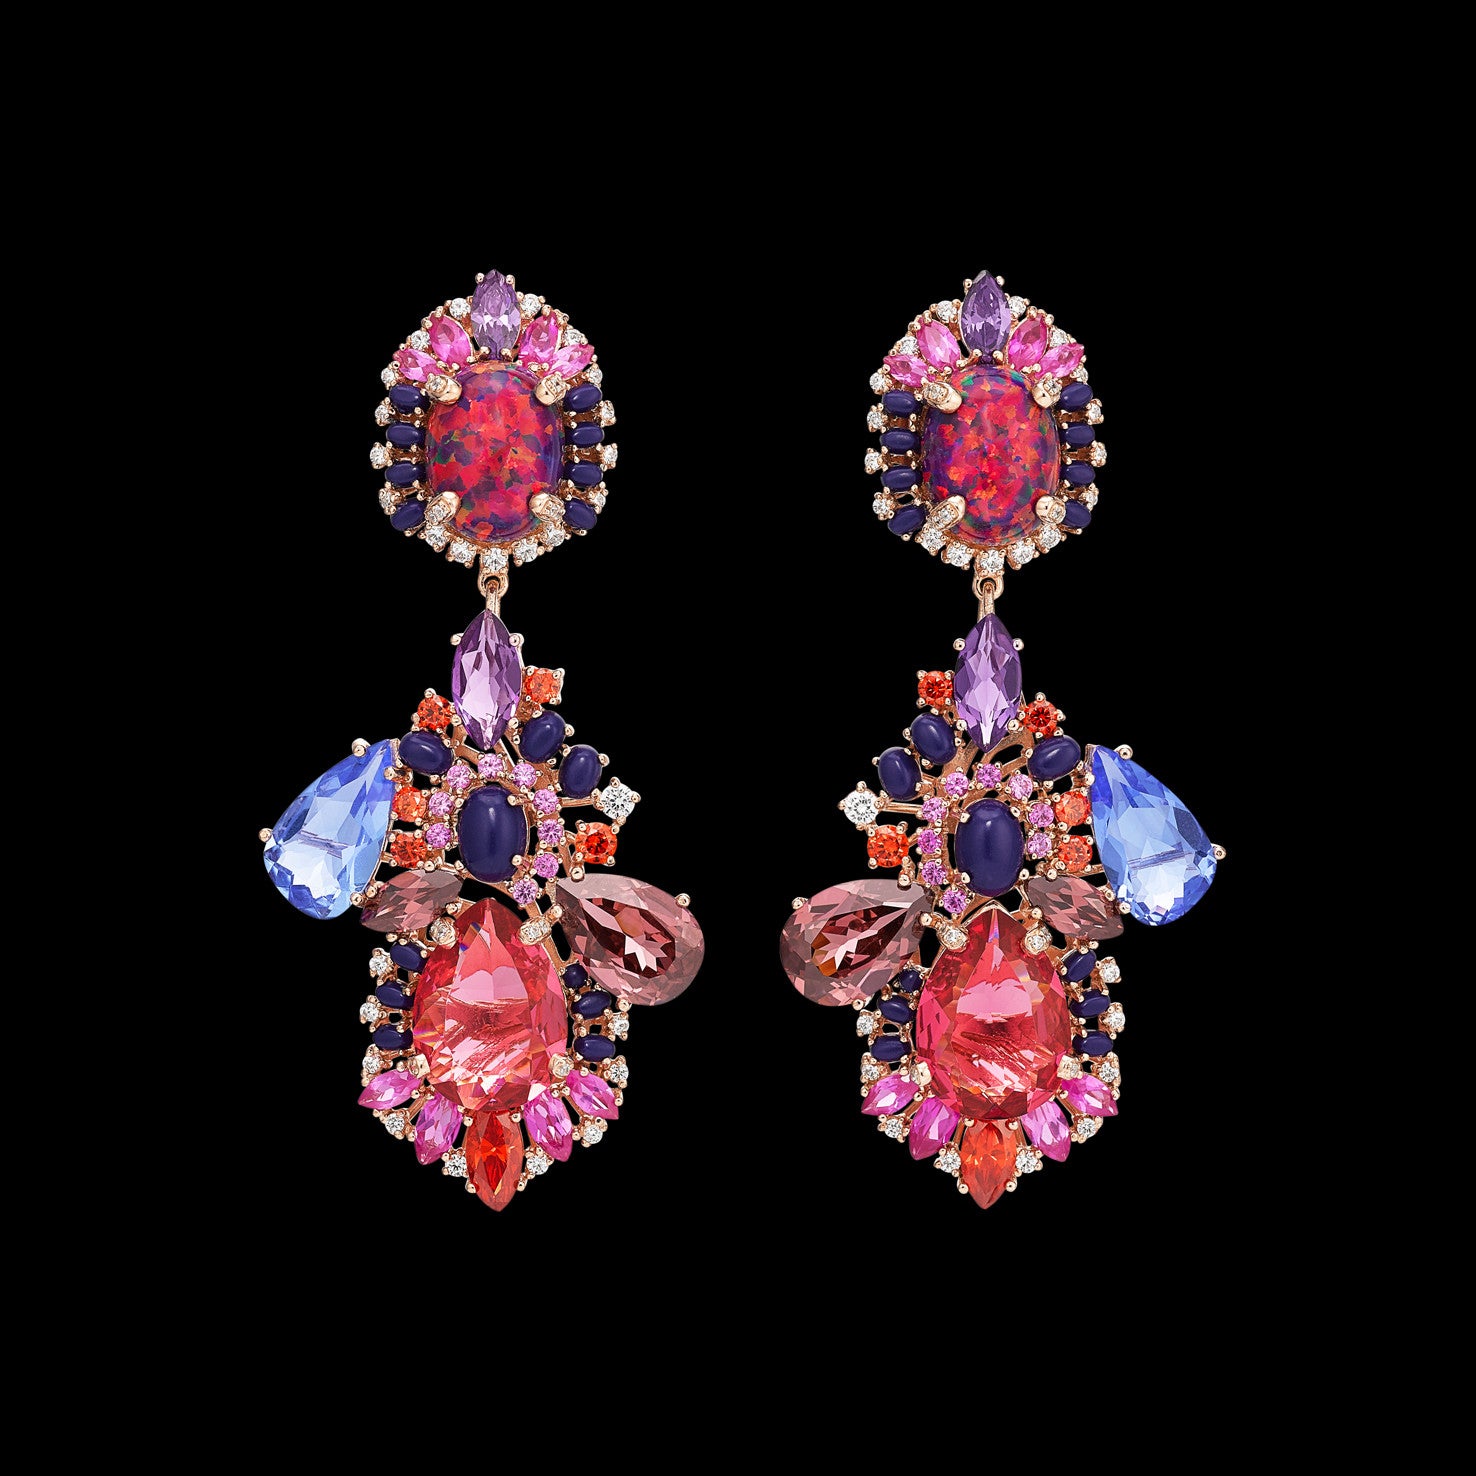 Violet Opal Nereides Earrings, Earring, Anabela Chan Joaillerie - Fine jewelry with laboratory grown and created gemstones hand-crafted in the United Kingdom. Anabela Chan Joaillerie is the first fine jewellery brand in the world to champion laboratory-grown and created gemstones with high jewellery design, artisanal craftsmanship and a focus on ethical and sustainable innovations.